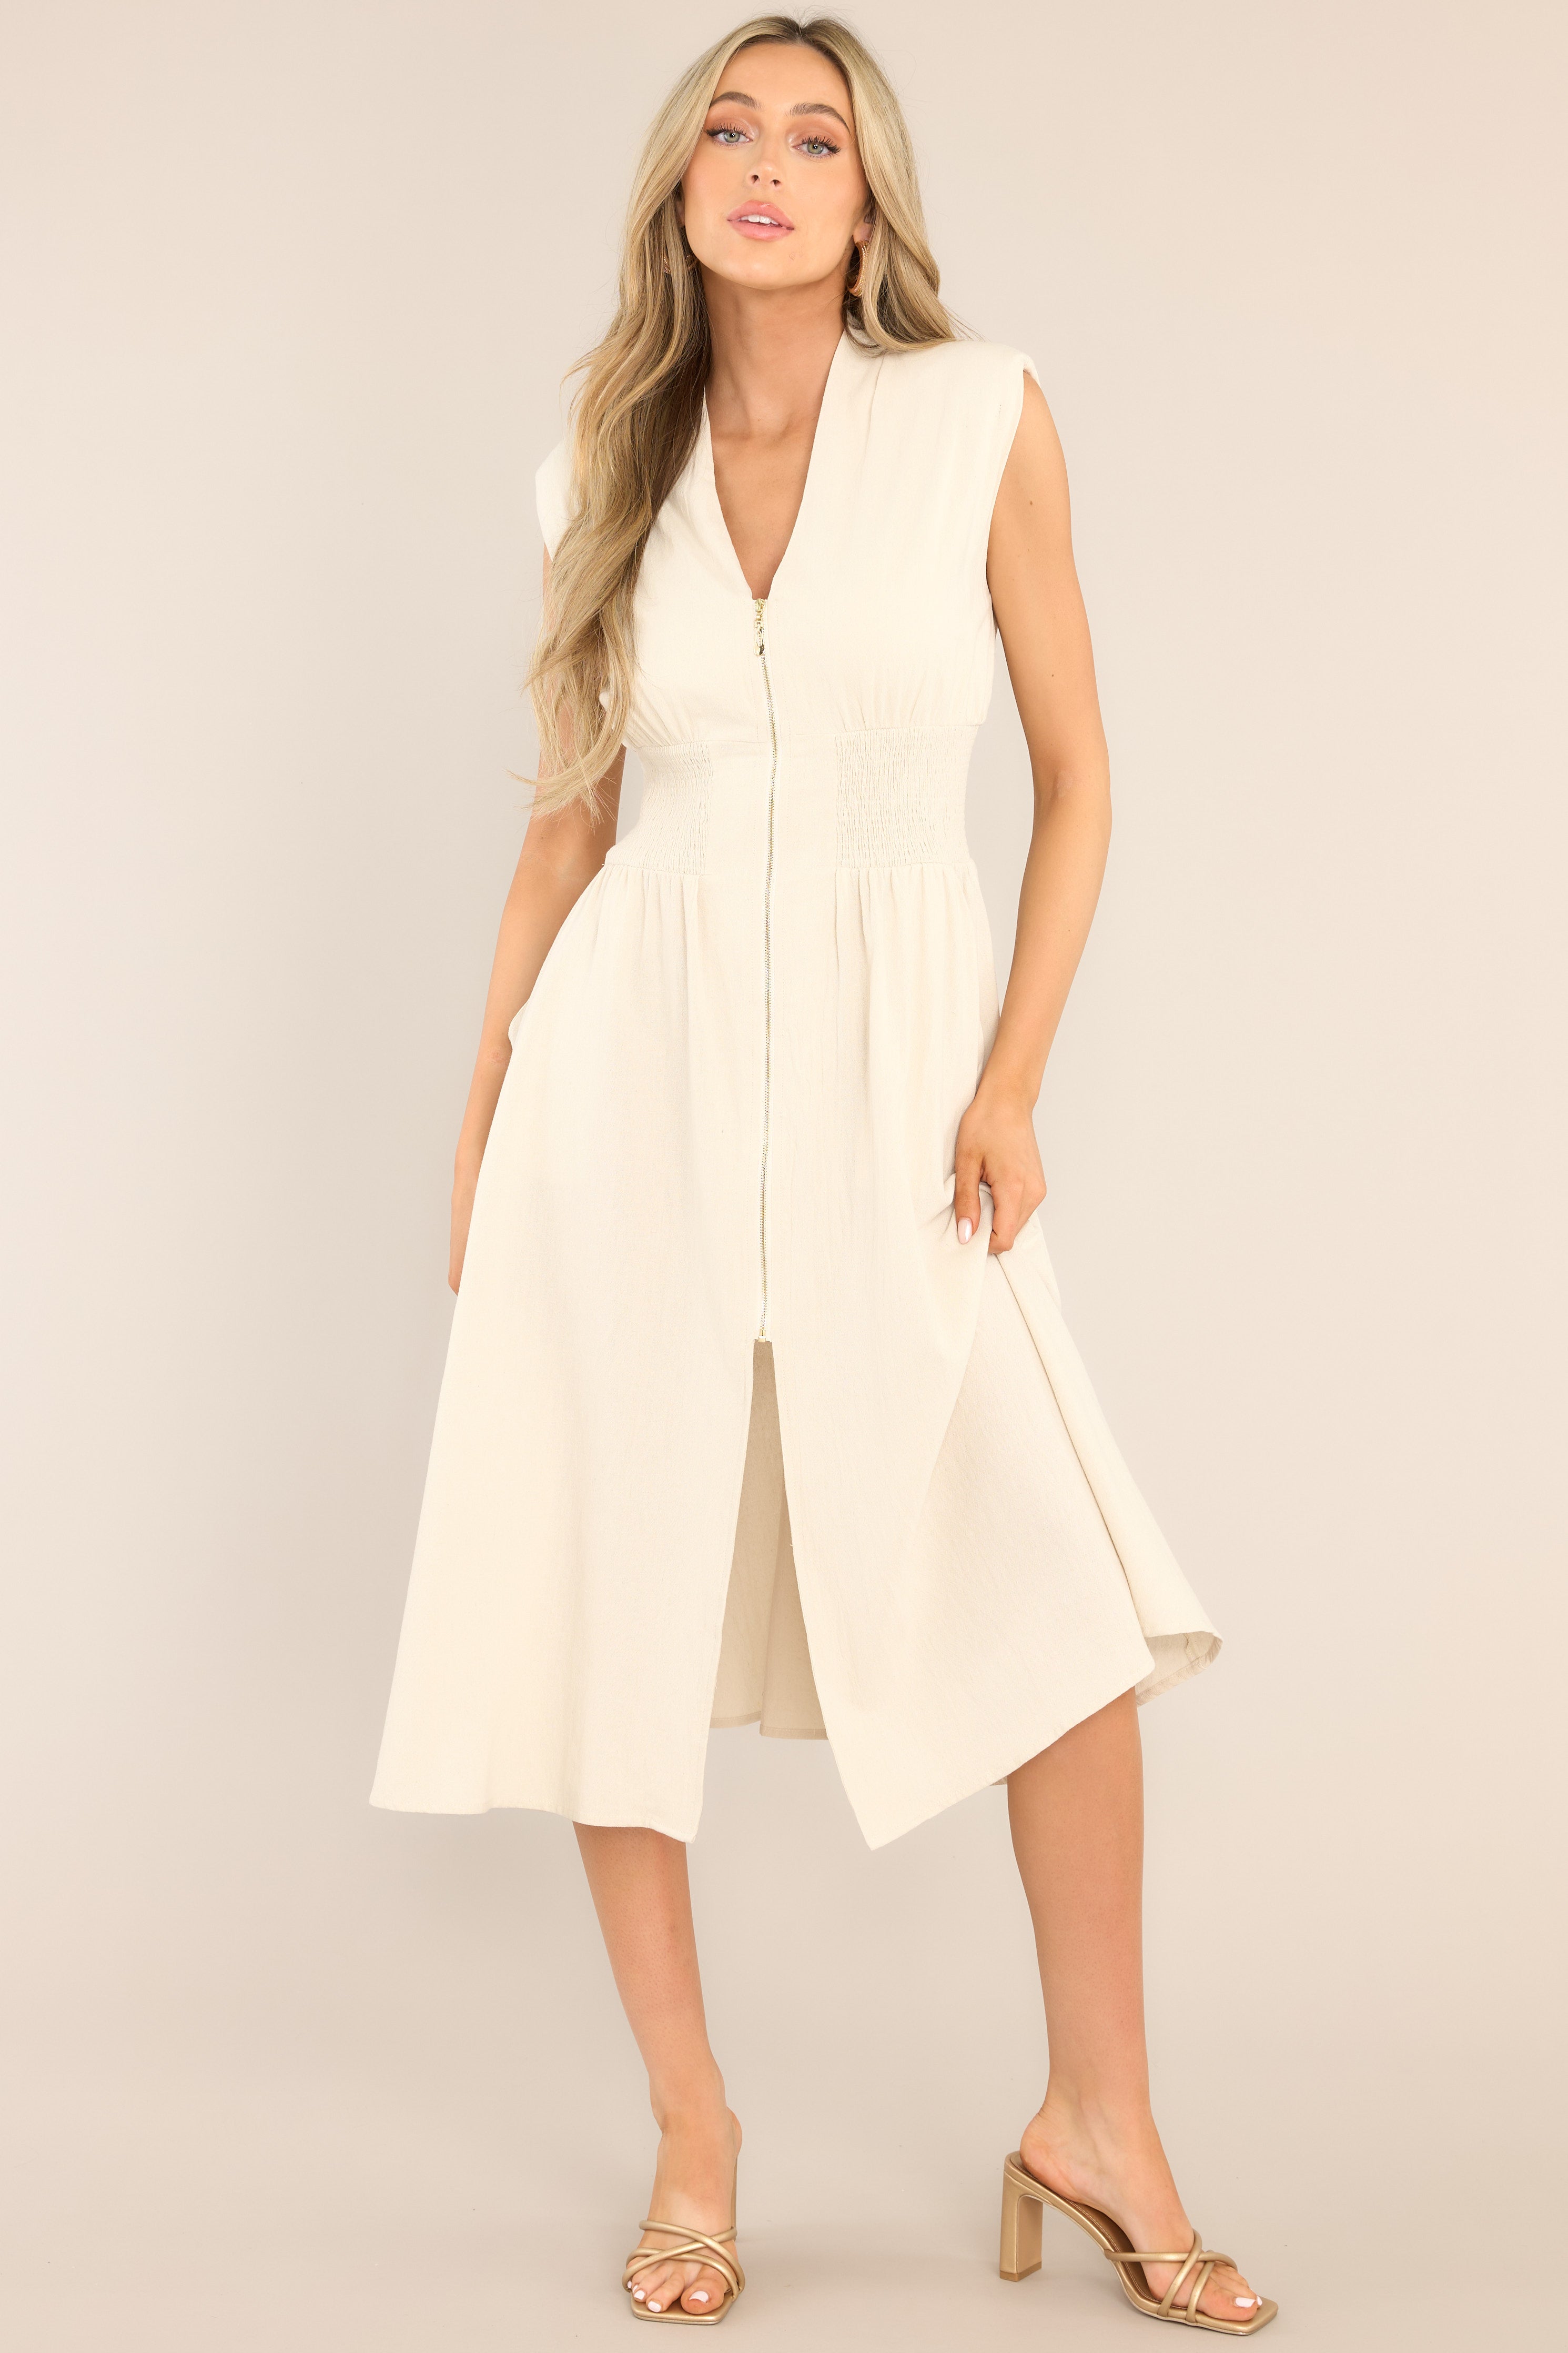 Full body view of this dress that features a deep v-neckline, shoulder padding, a functional zipper front, a fully smocked waist, functional pockets, and a front slit. 